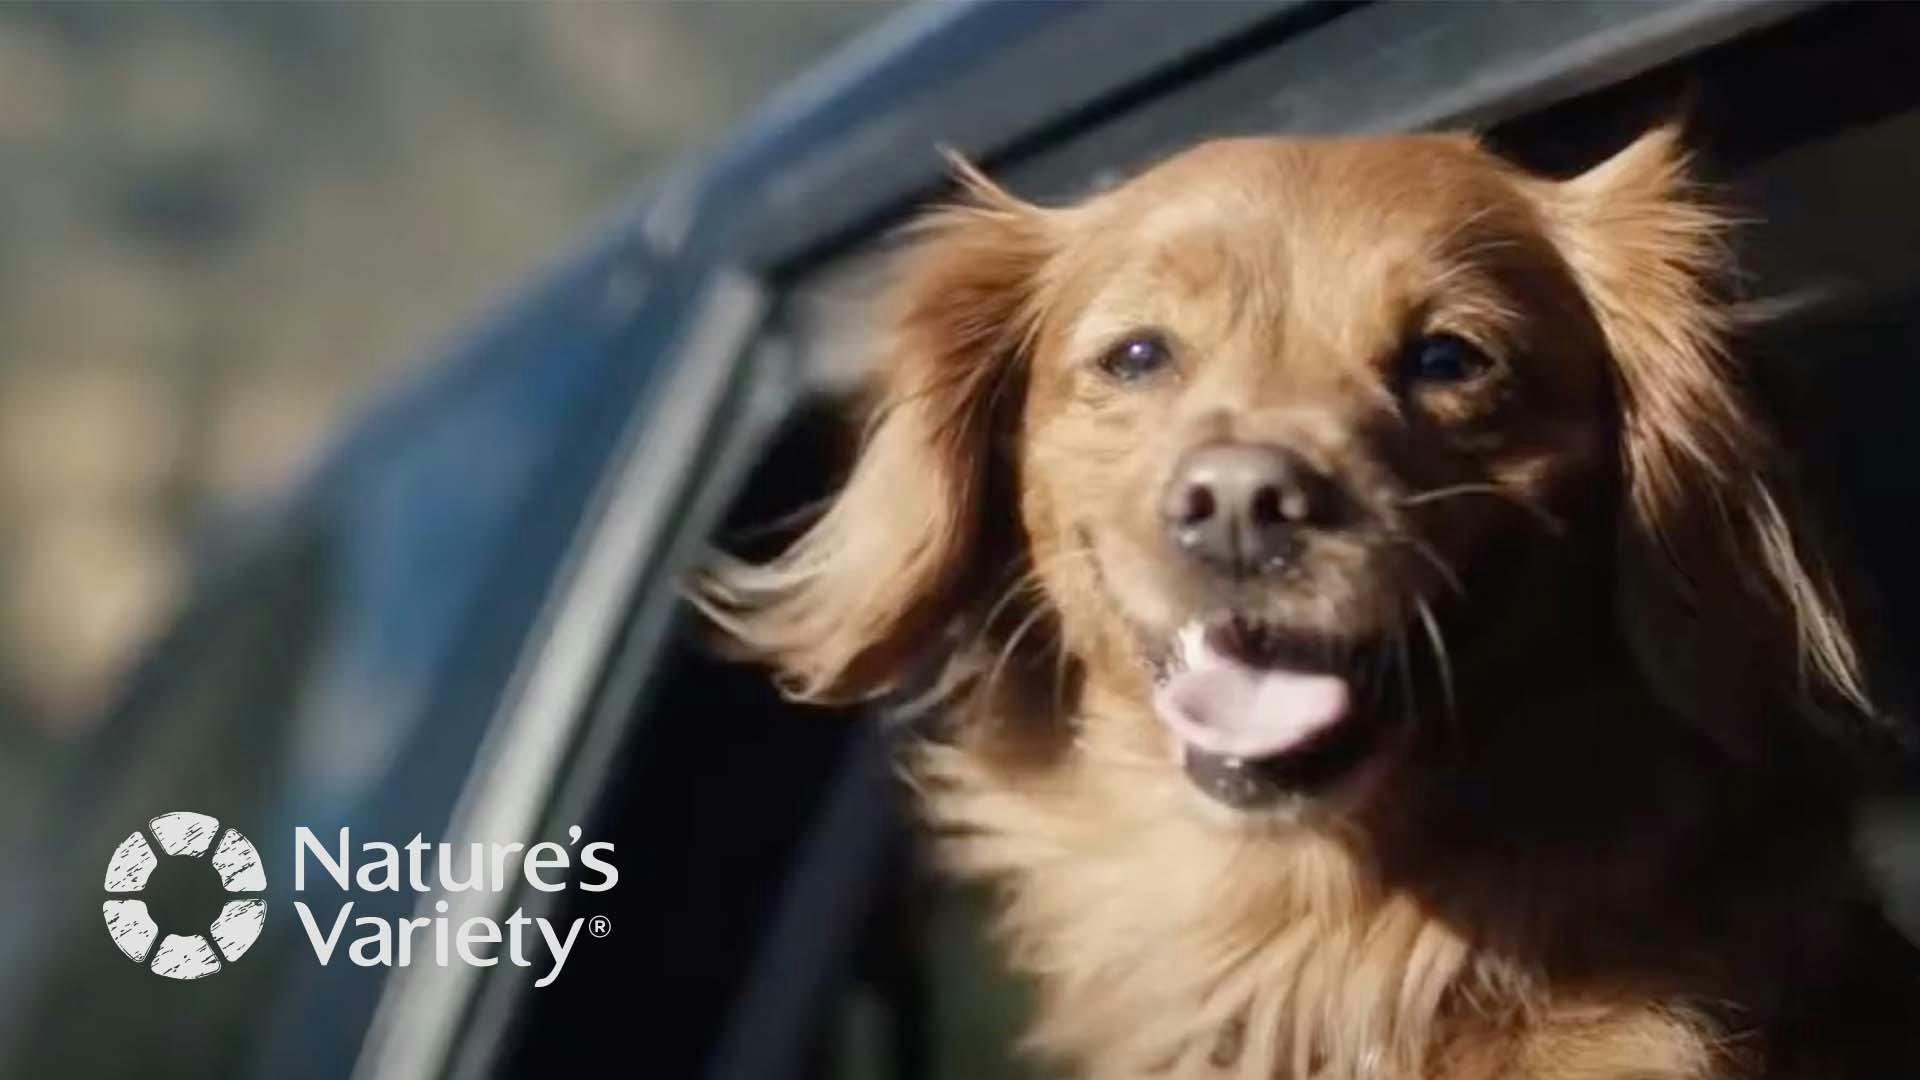 A happy dog looks out a car window.